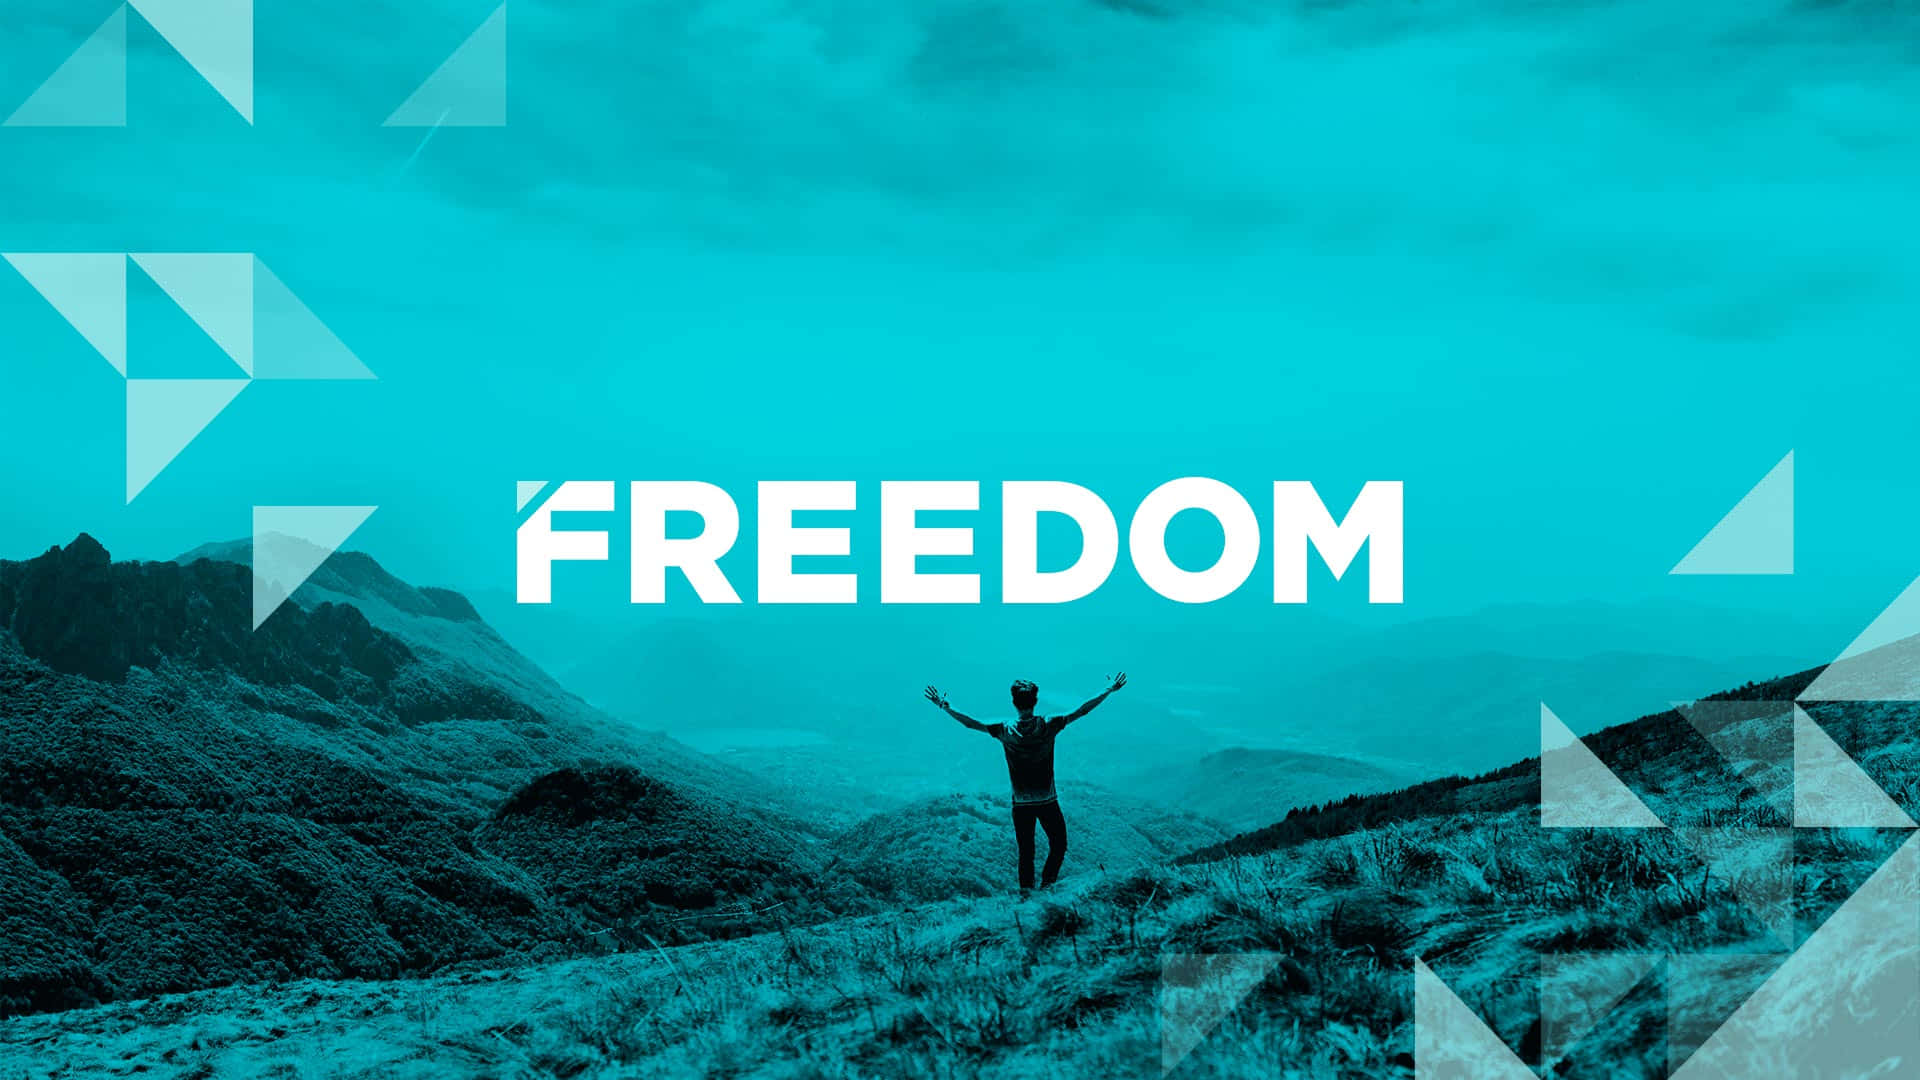 Freedom - A Man Standing On Top Of A Mountain